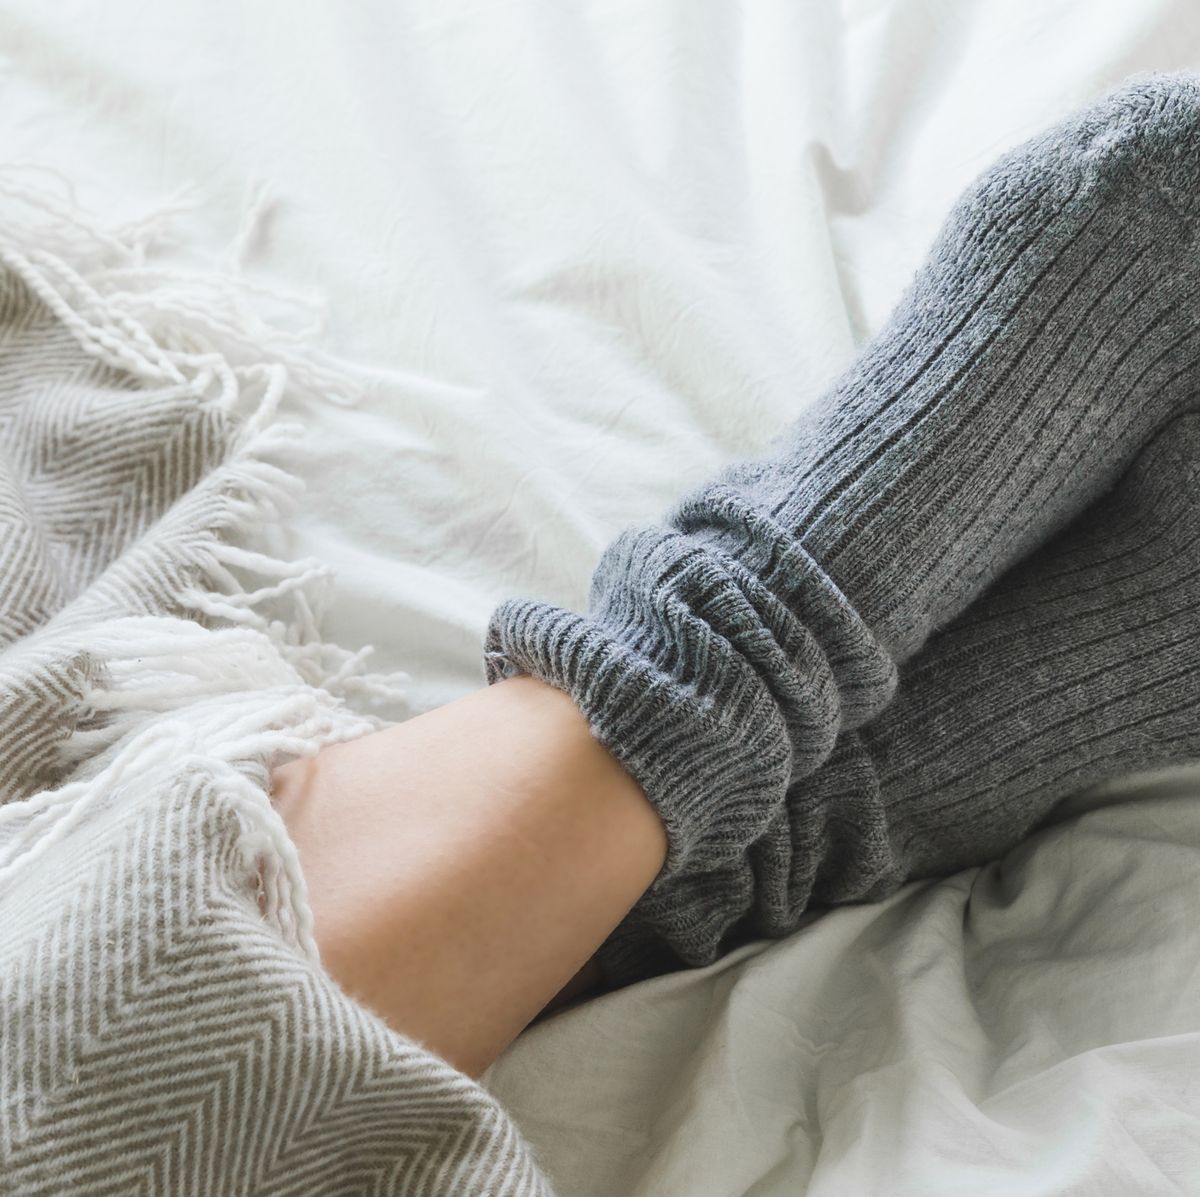 Five reasons your feet are always cold